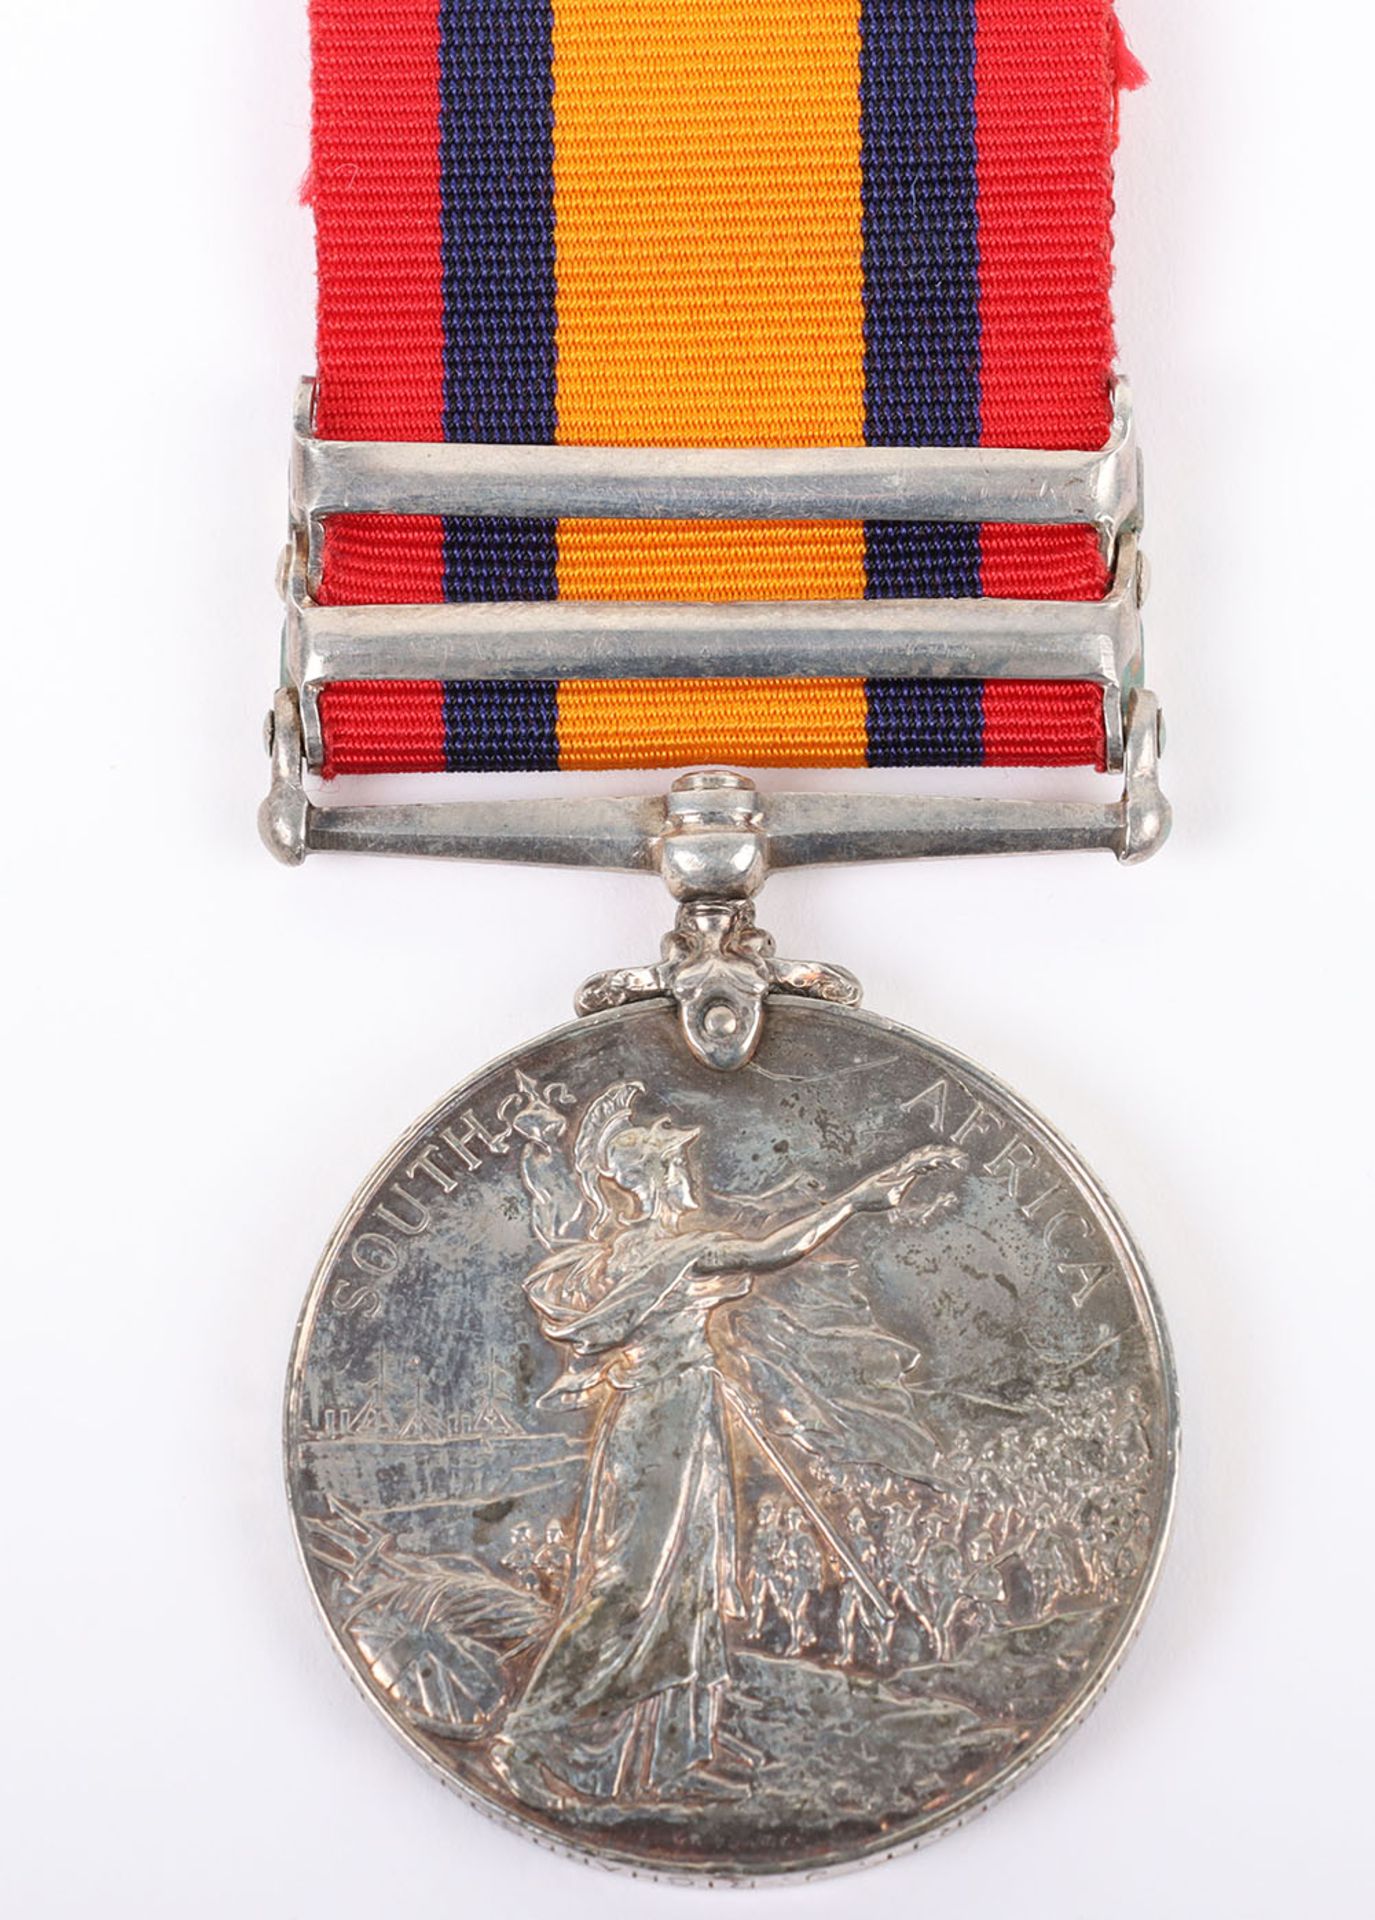 Queens South Africa Medal 4th Battalion the Durham Light Infantry - Image 7 of 7